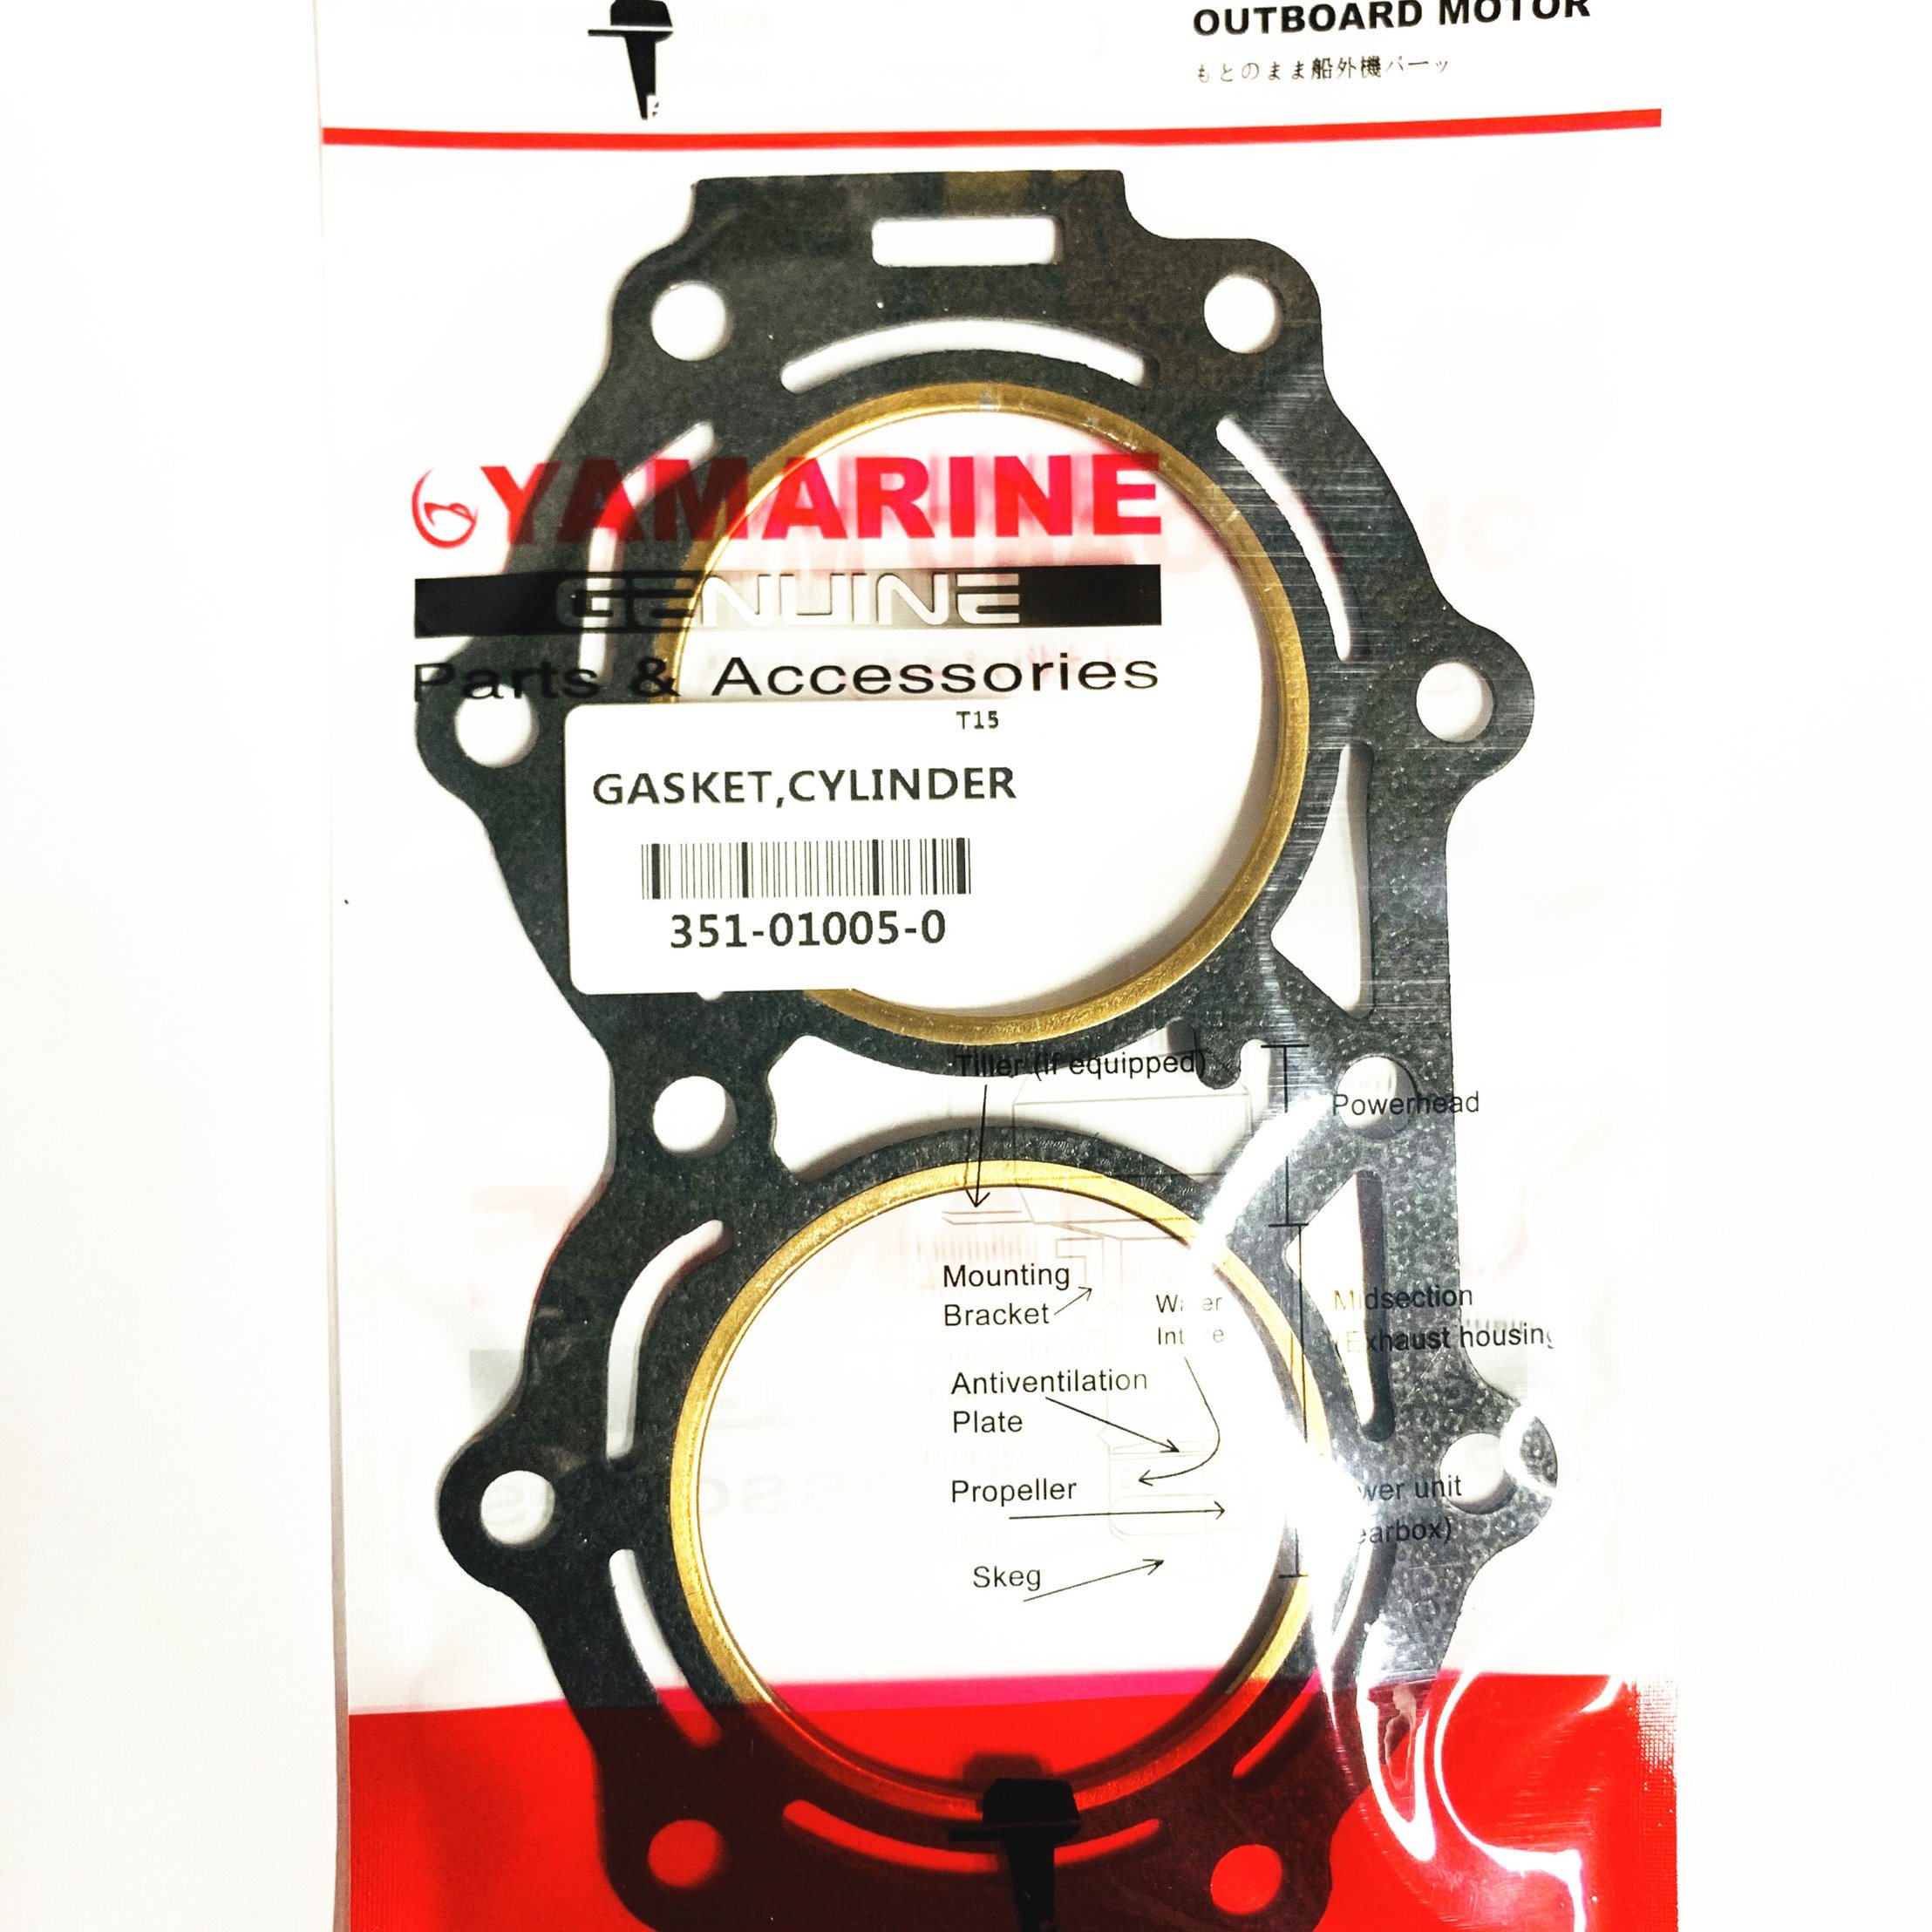 351-01005-0 Cylinder Head Gasket for Tohatsu Outboard 9.9/15 HP 2 Stroke 2 Cyl, 351-01005-0